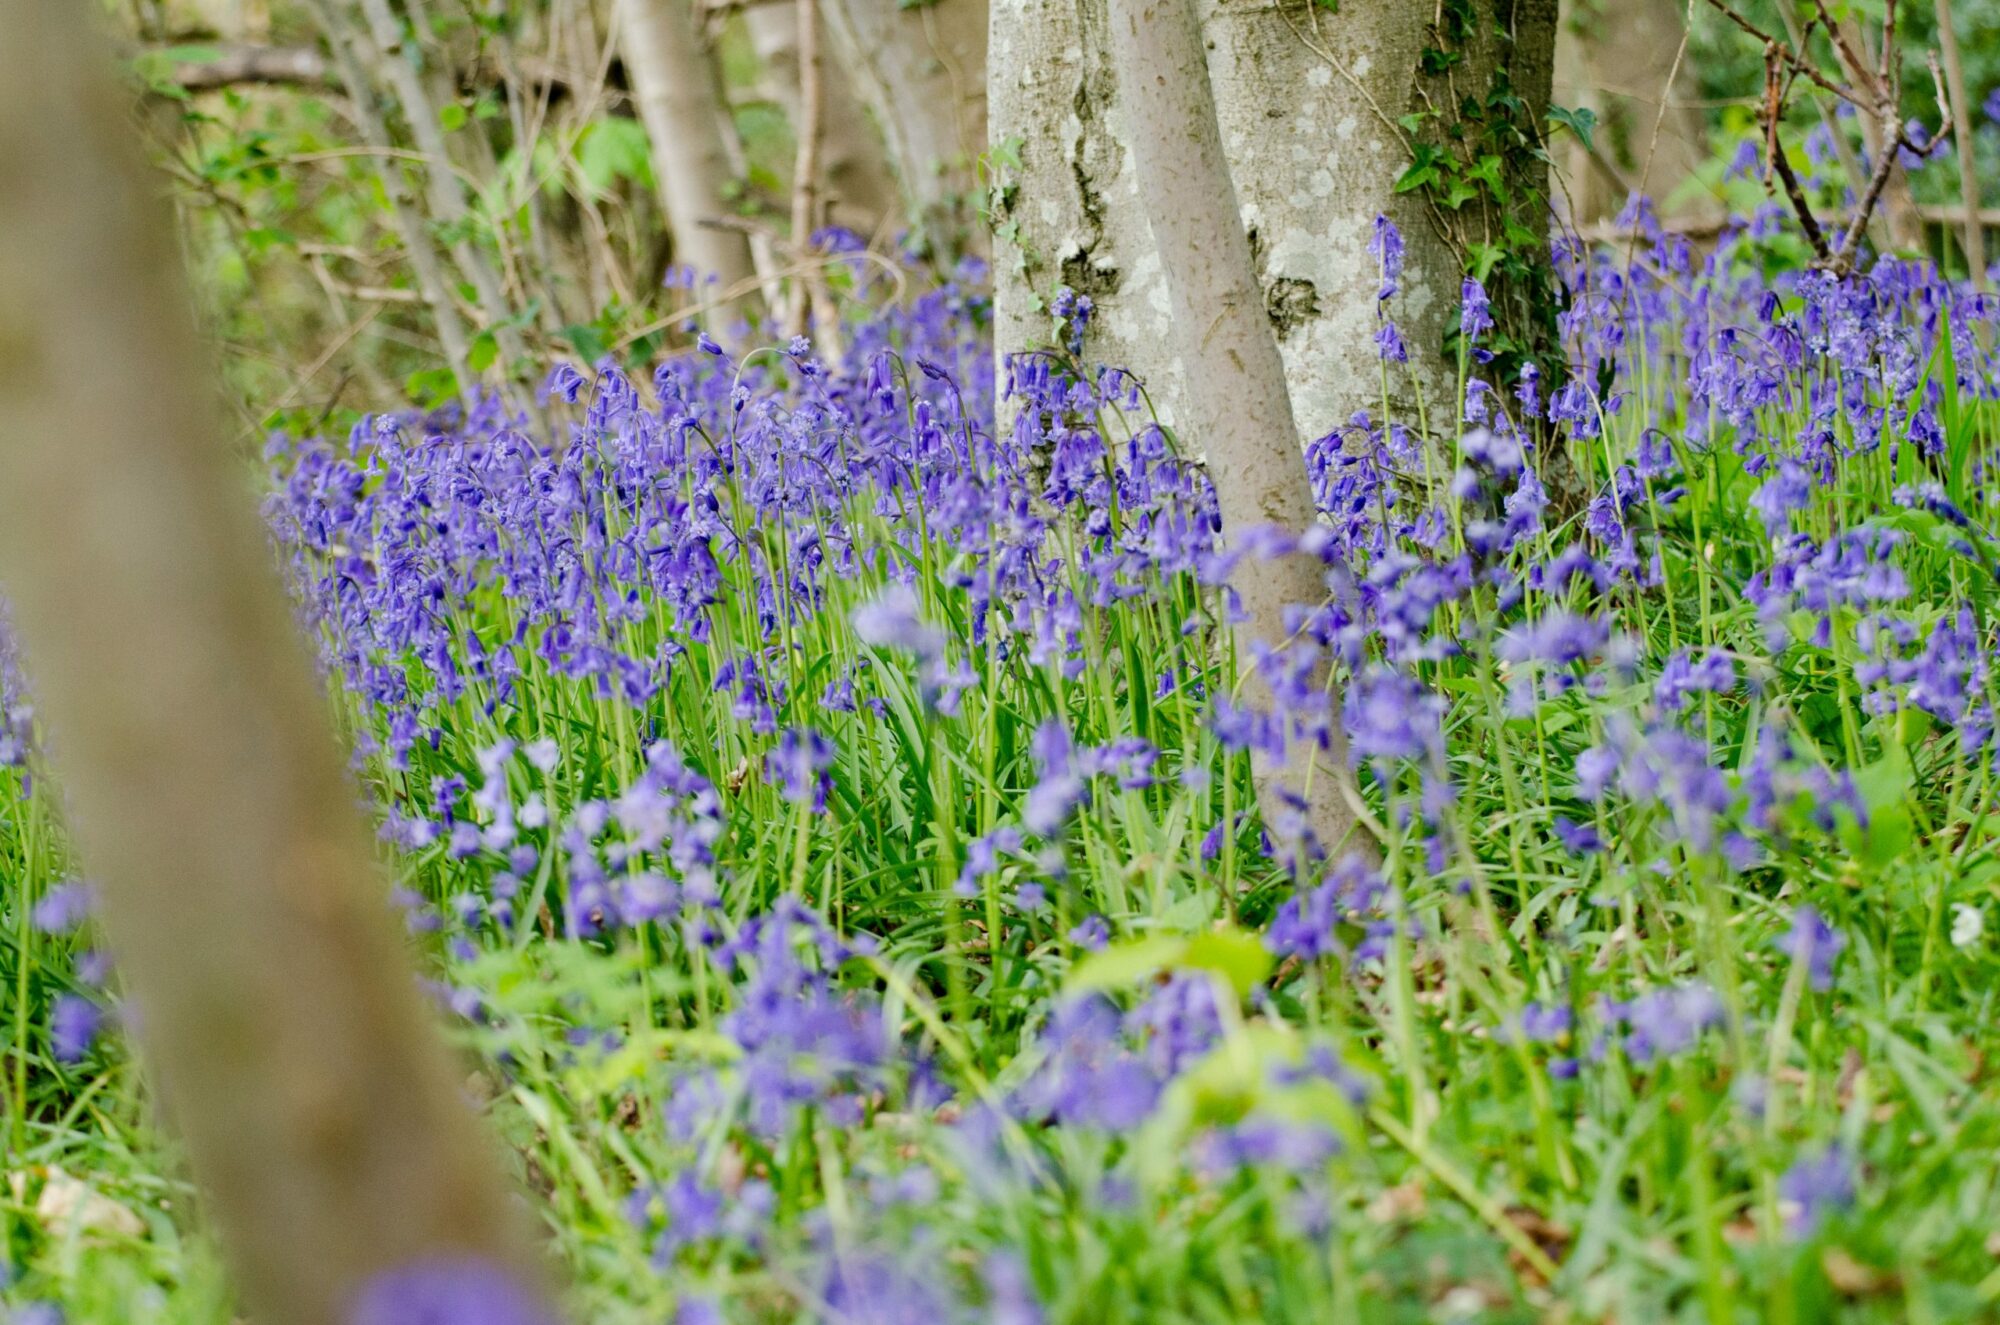 Image name Bluebells Josh Raper Conservation Media 5 scaled 1 the 25 image from the post Walking, Wellbeing and Wildlife in Yorkshire.com.